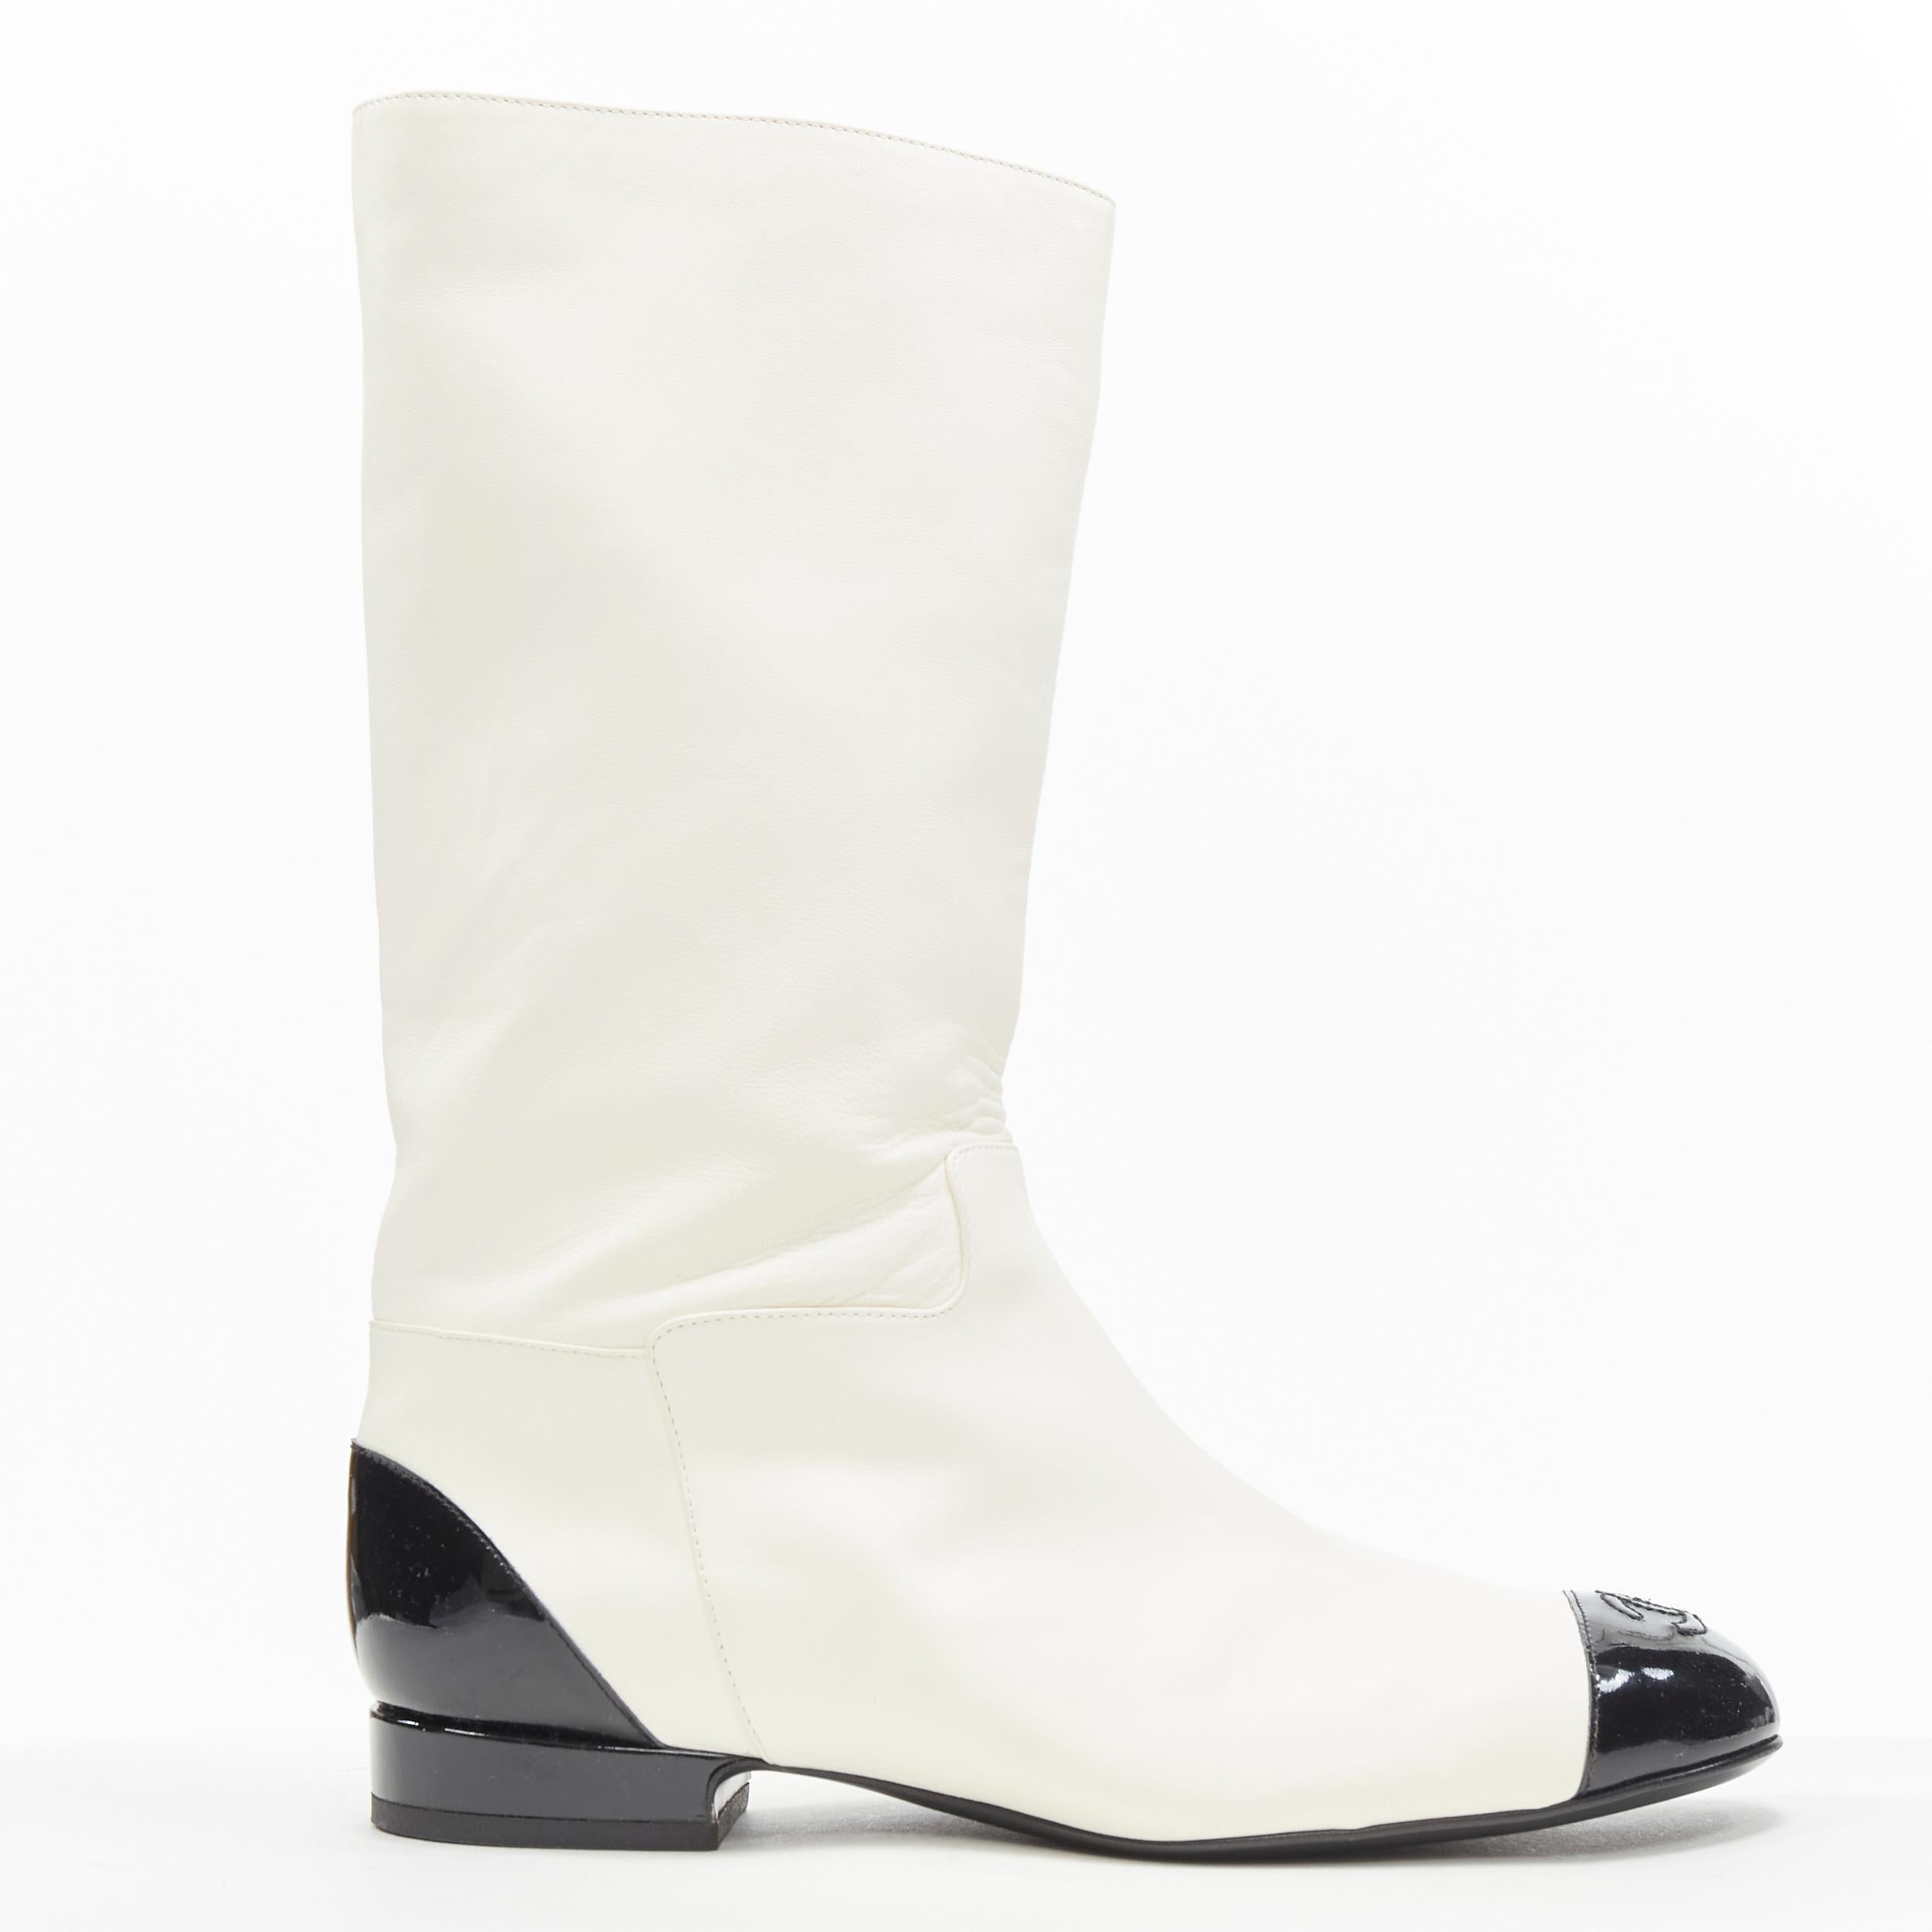 rare CHANEL white soft leather CC logo patent toe cap pull on flat boots EU38 
Reference: CAWG/A00170 
Brand: Chanel 
Designer: Karl Lagerfeld 
Material: Leather 
Color: White 
Pattern: Solid 
Closure: Pull on 
Extra Detail: Soft supple white